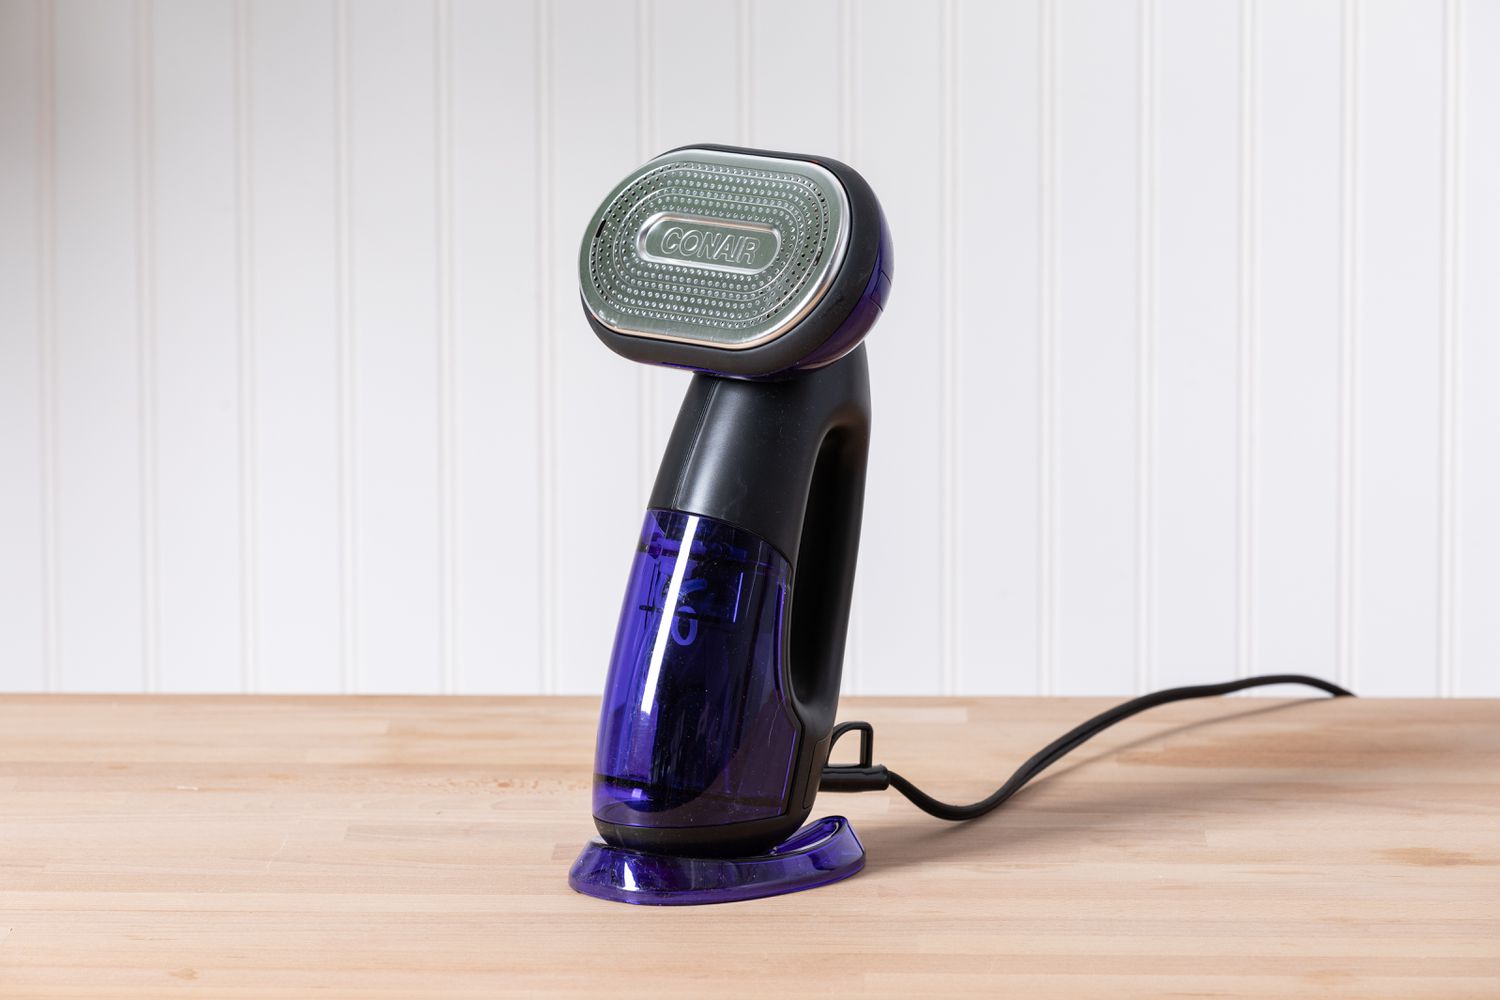 https://storables.com/wp-content/uploads/2023/07/conair-turbo-steamer-how-to-use-1690291617.jpg